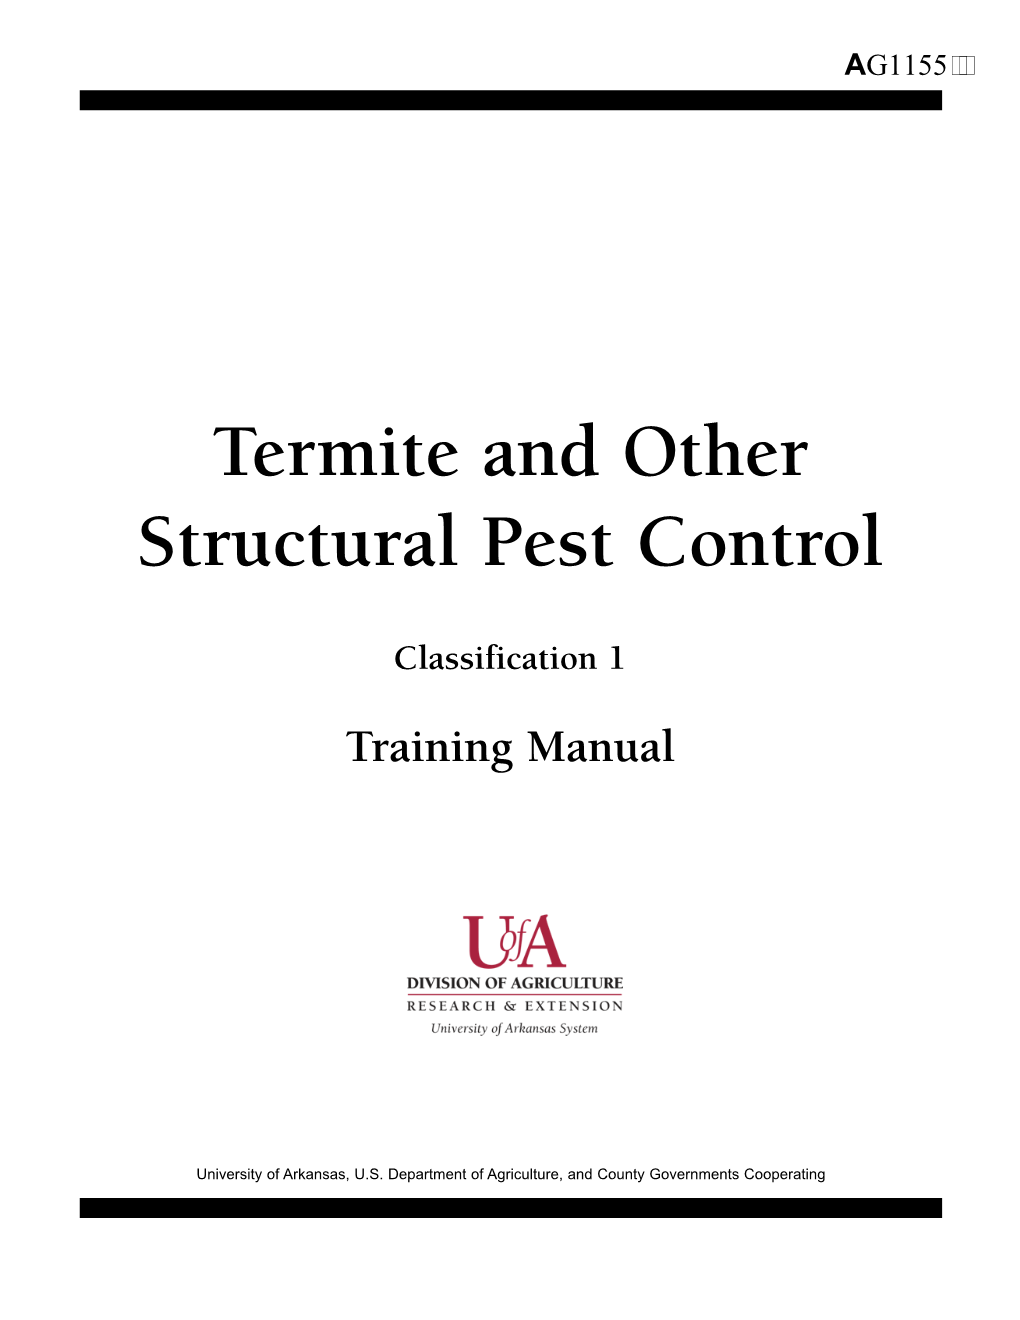 Termite and Other Structural Pest Control